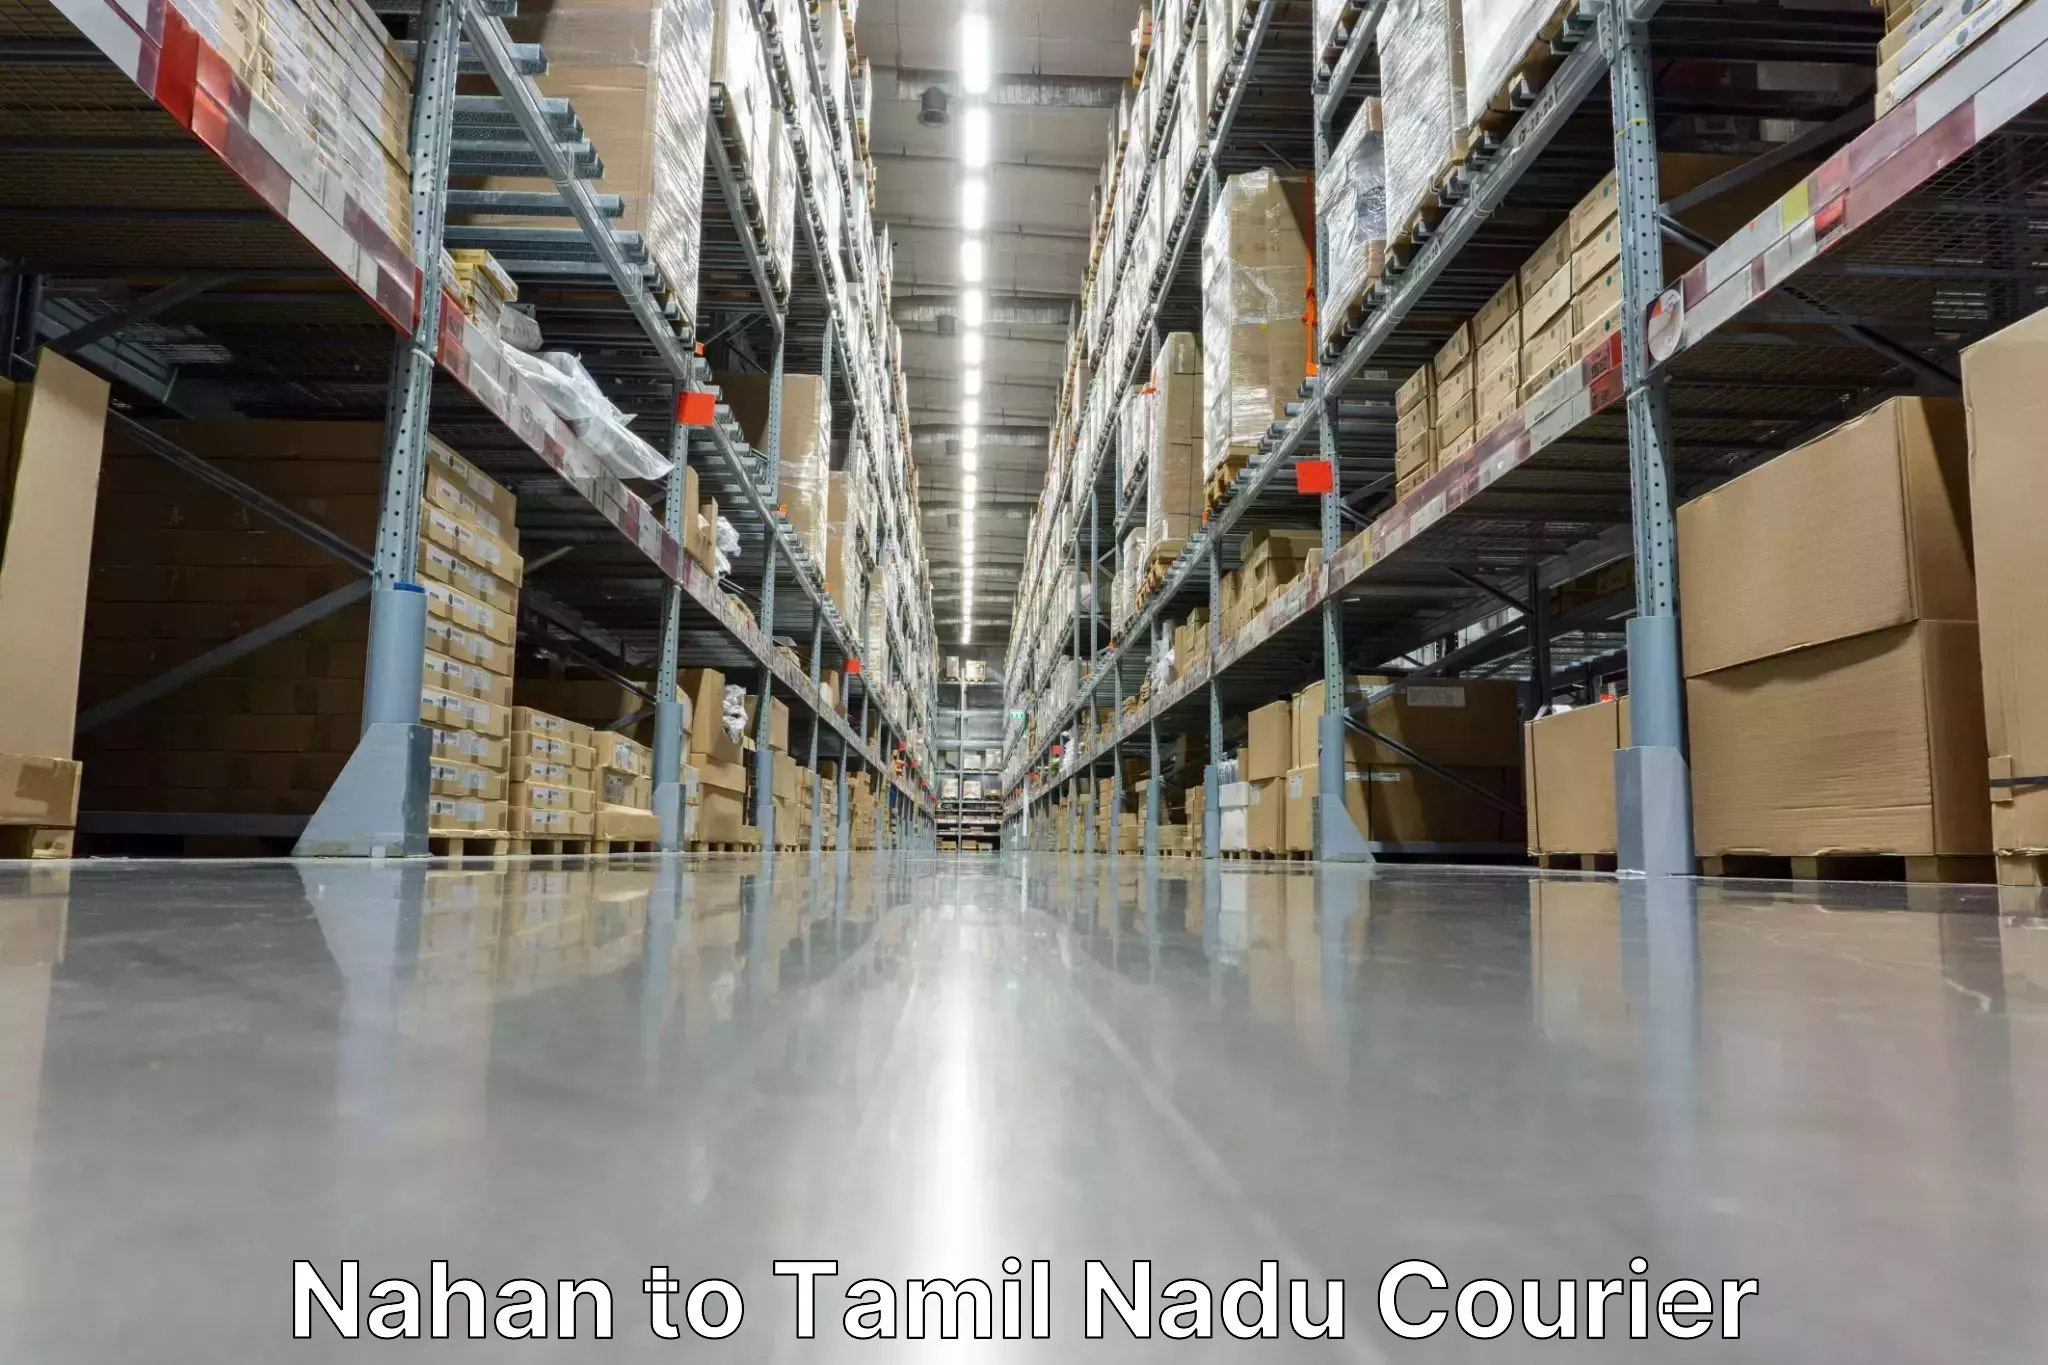 Courier service partnerships Nahan to Chennai Port